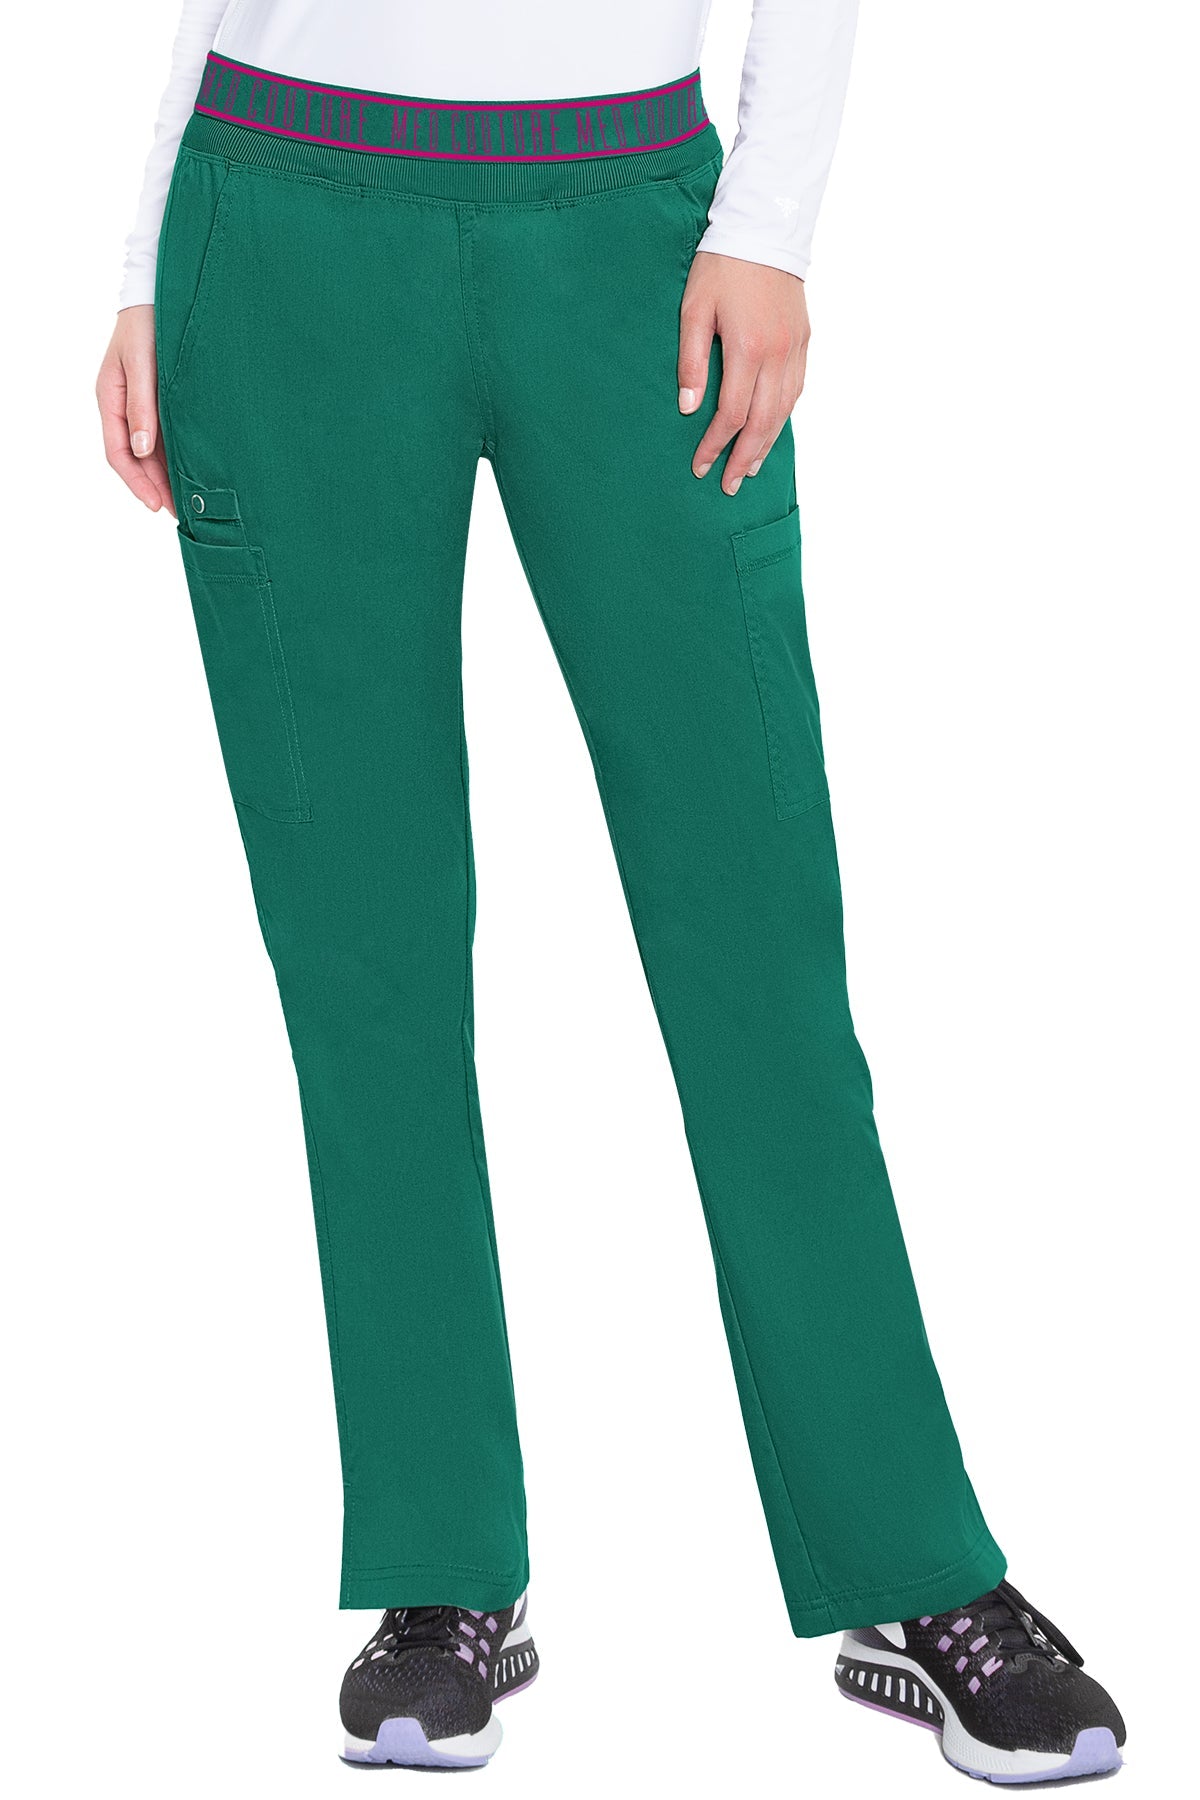 Med Couture 7739 YOGA 2 CARGO POCKET PANT (Size: XS/P-2X/P)